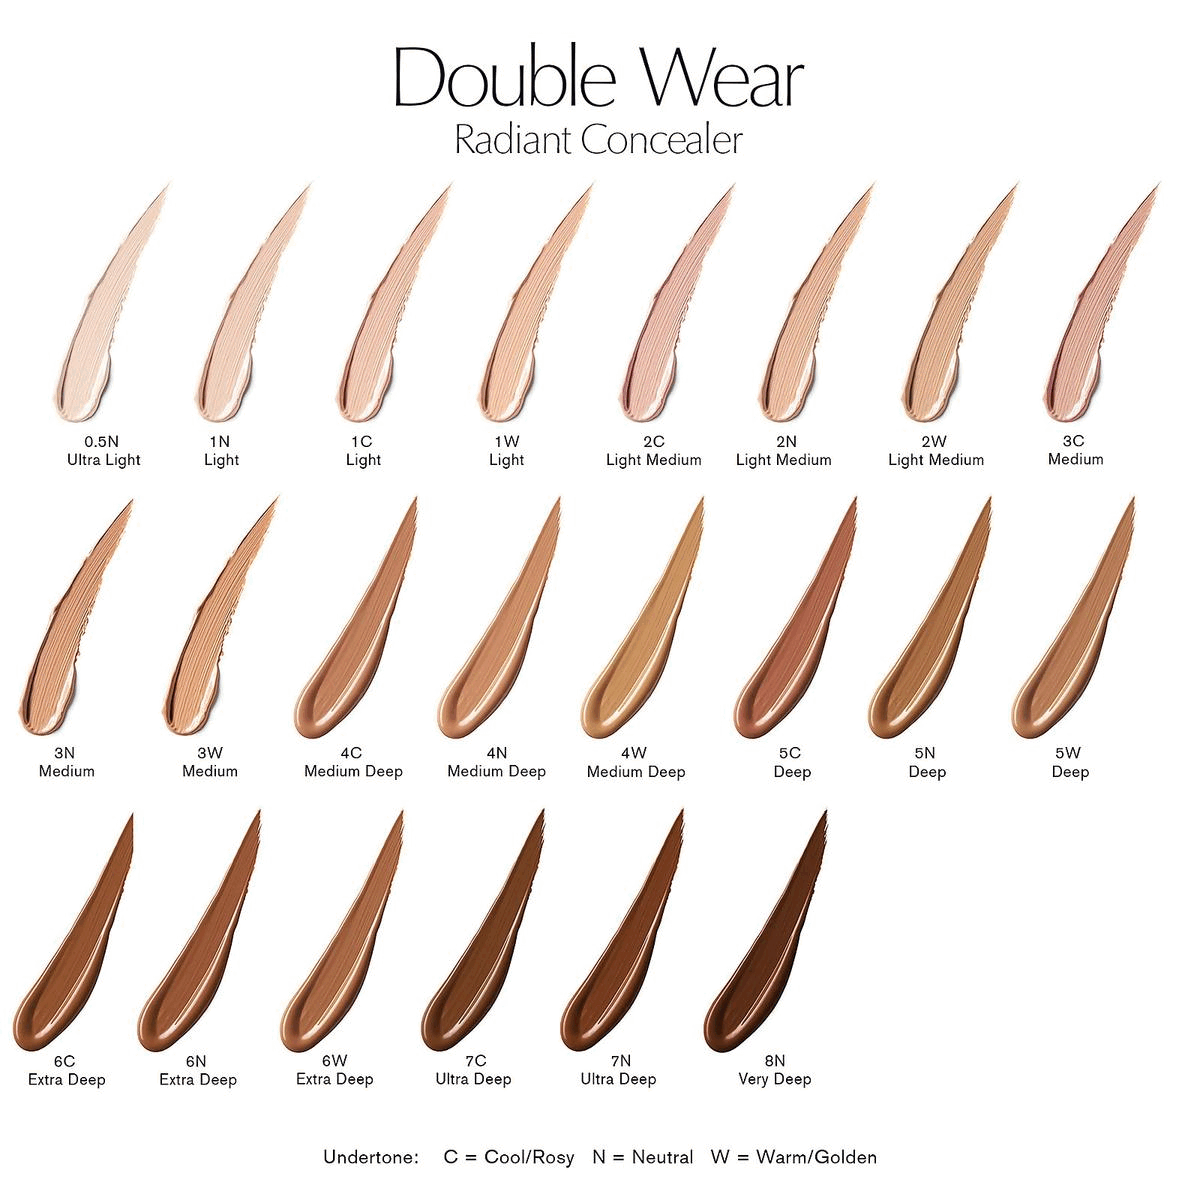 Image 1, Swatches of the concealer shades. Image 2, Differences between the radiant and matte concealers